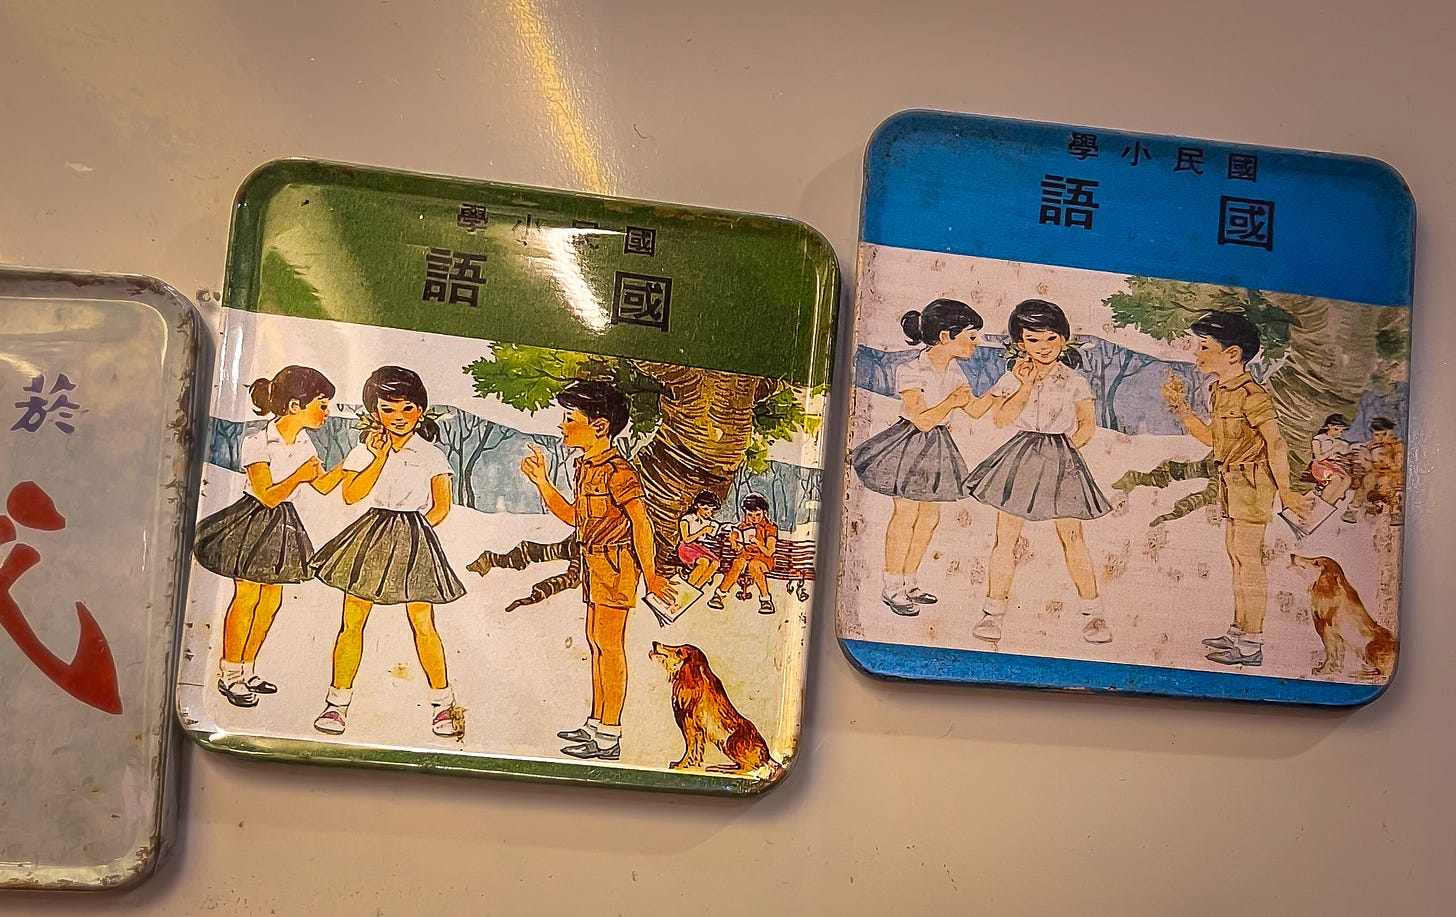 Magnets promoting the "national language" in a Mandarin promotion campaign from 1950s and 60s Taiwan